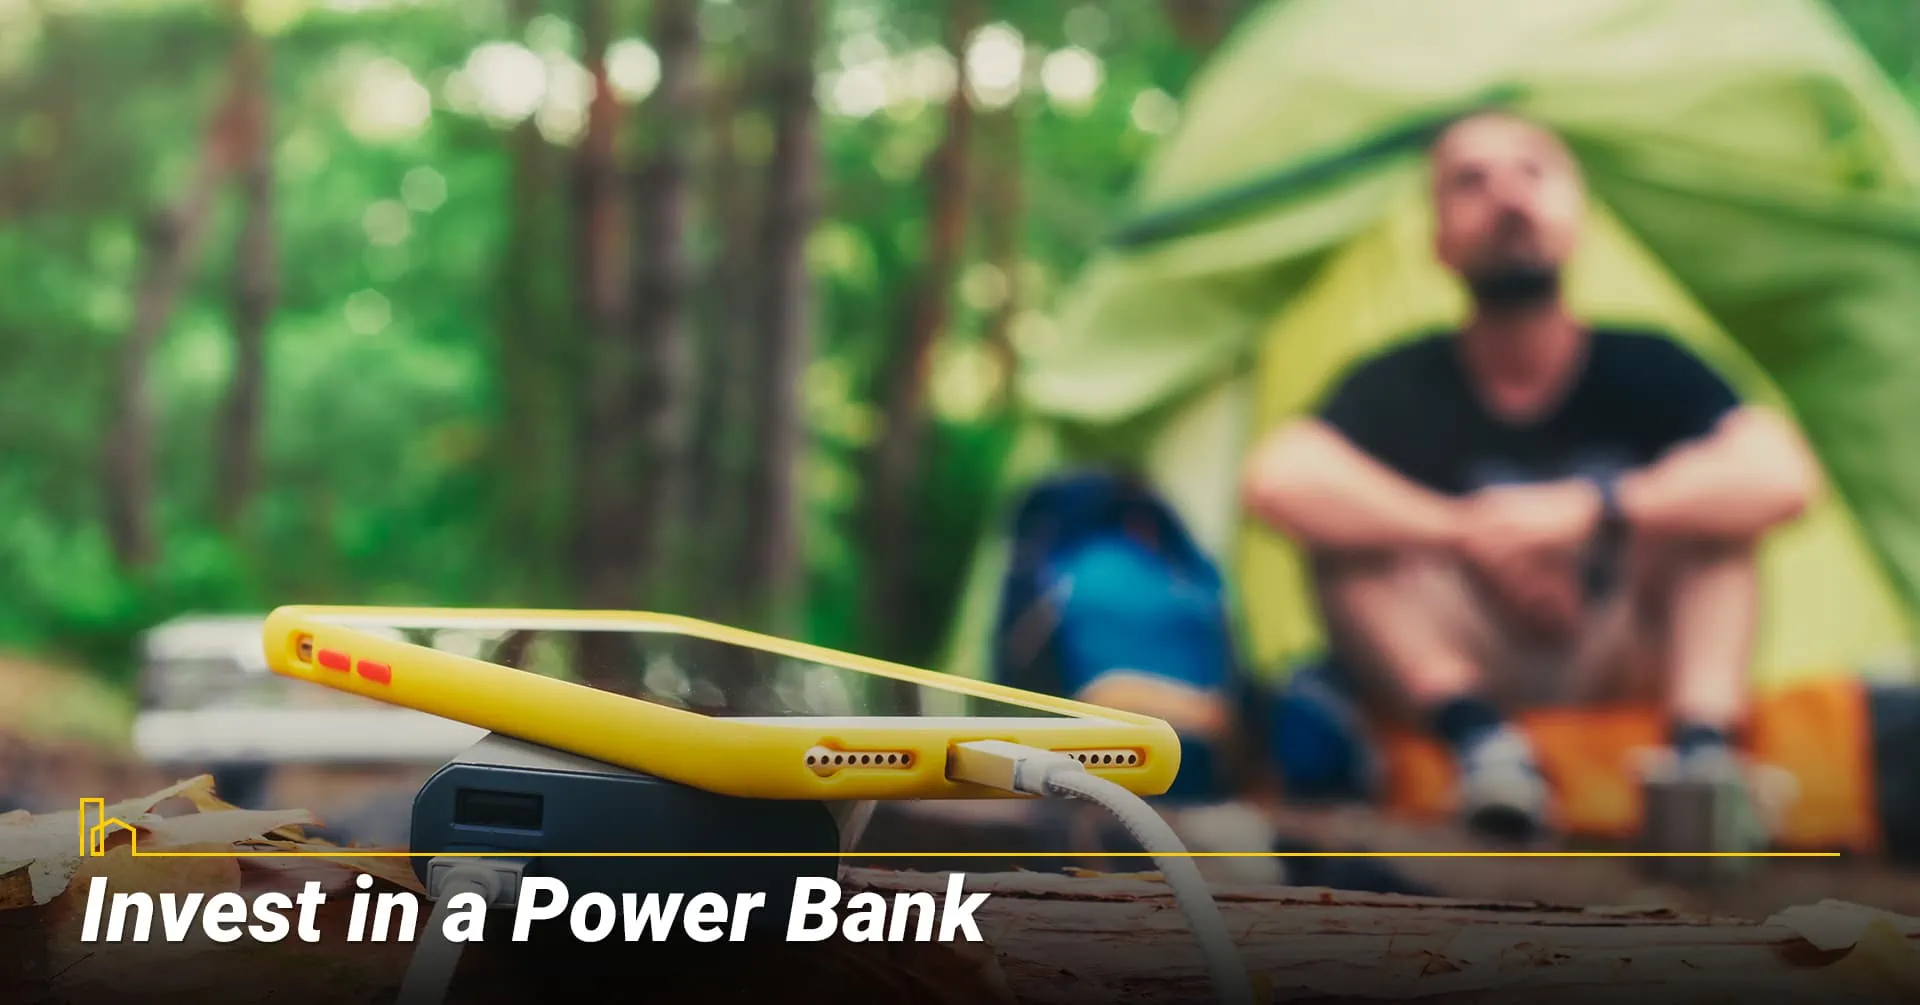 Invest in a Power Bank